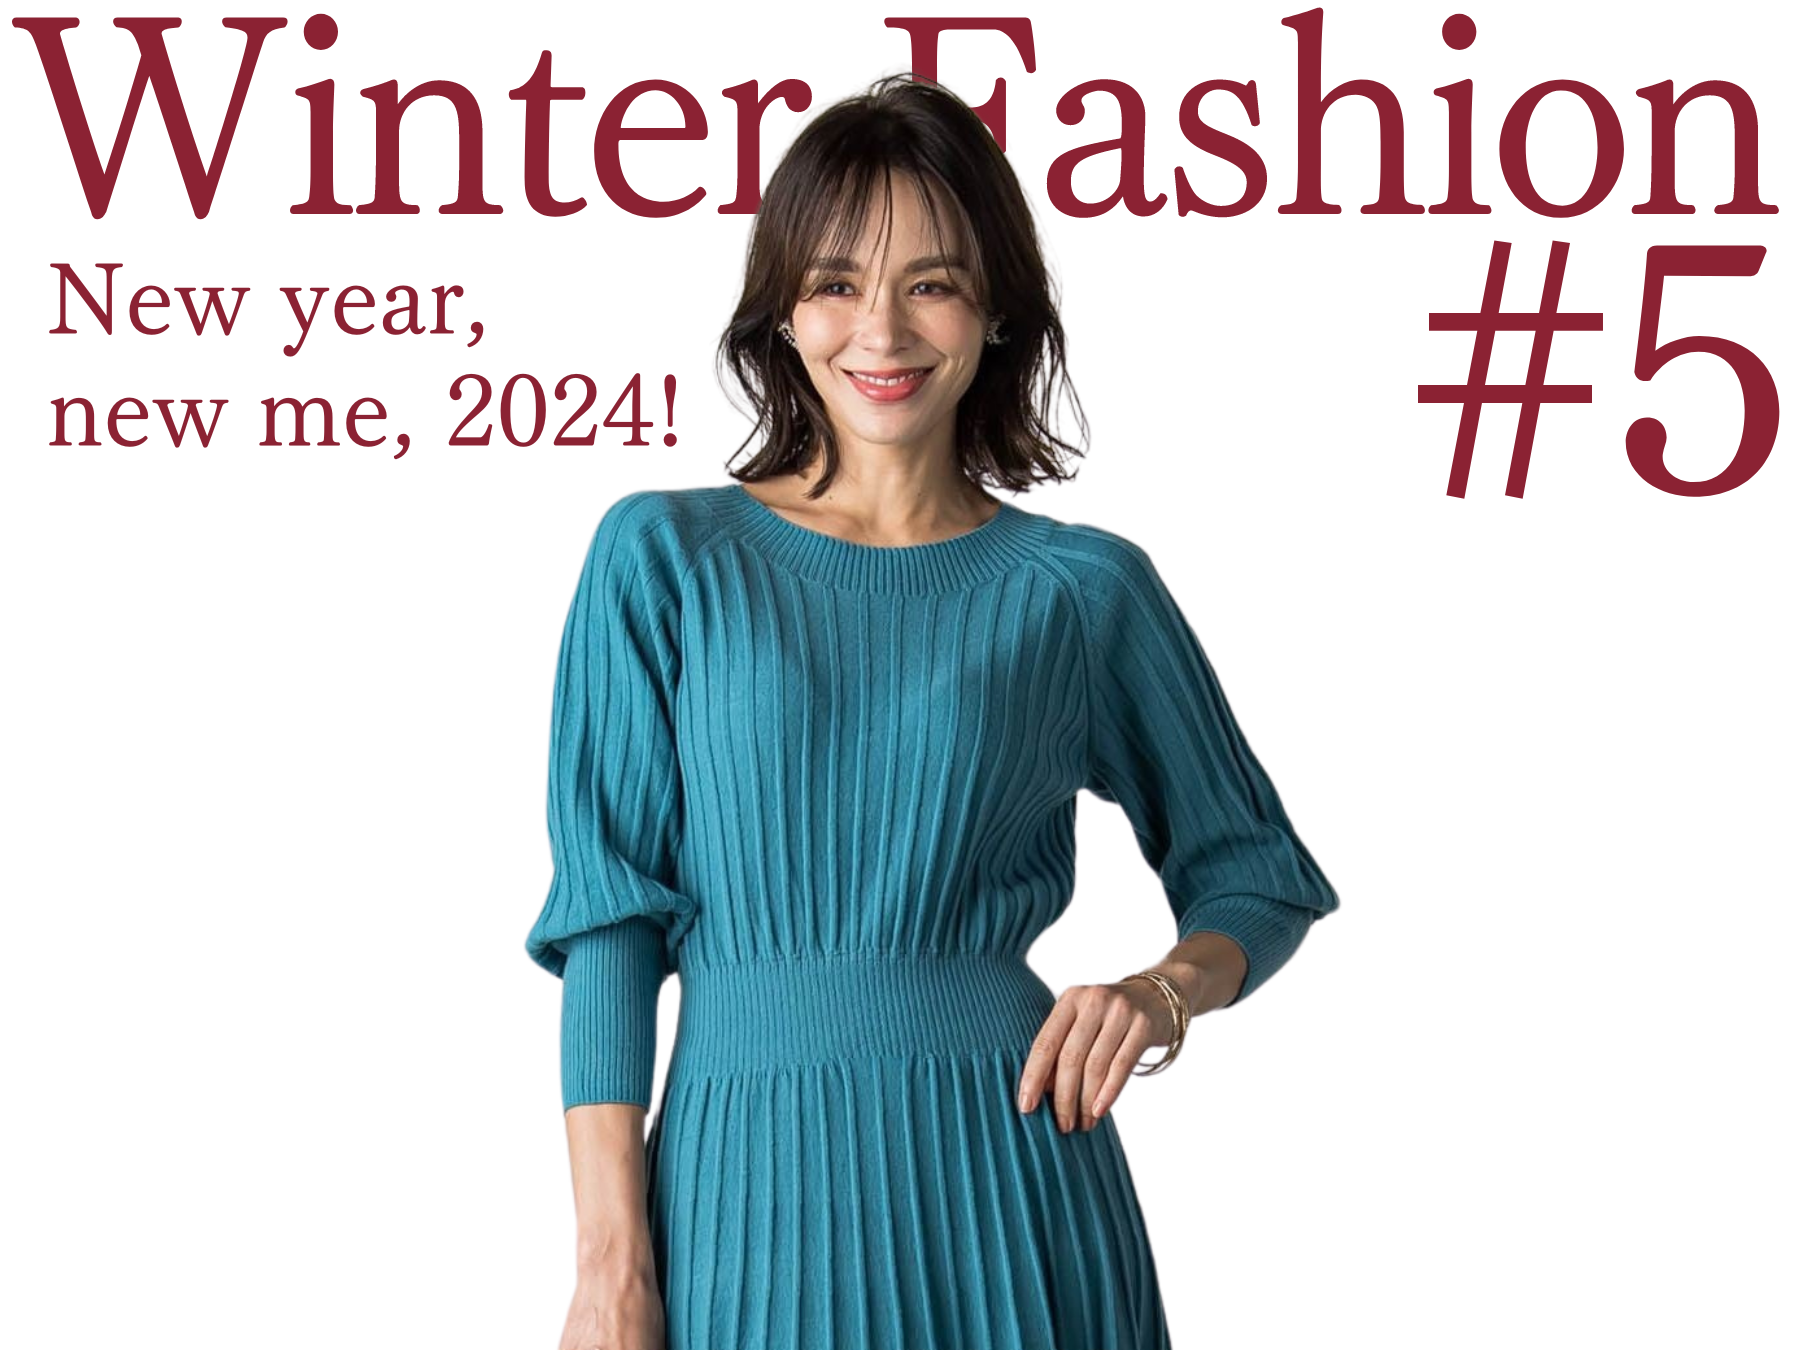 Winter Fashion #5 New year, new me, 2024! 